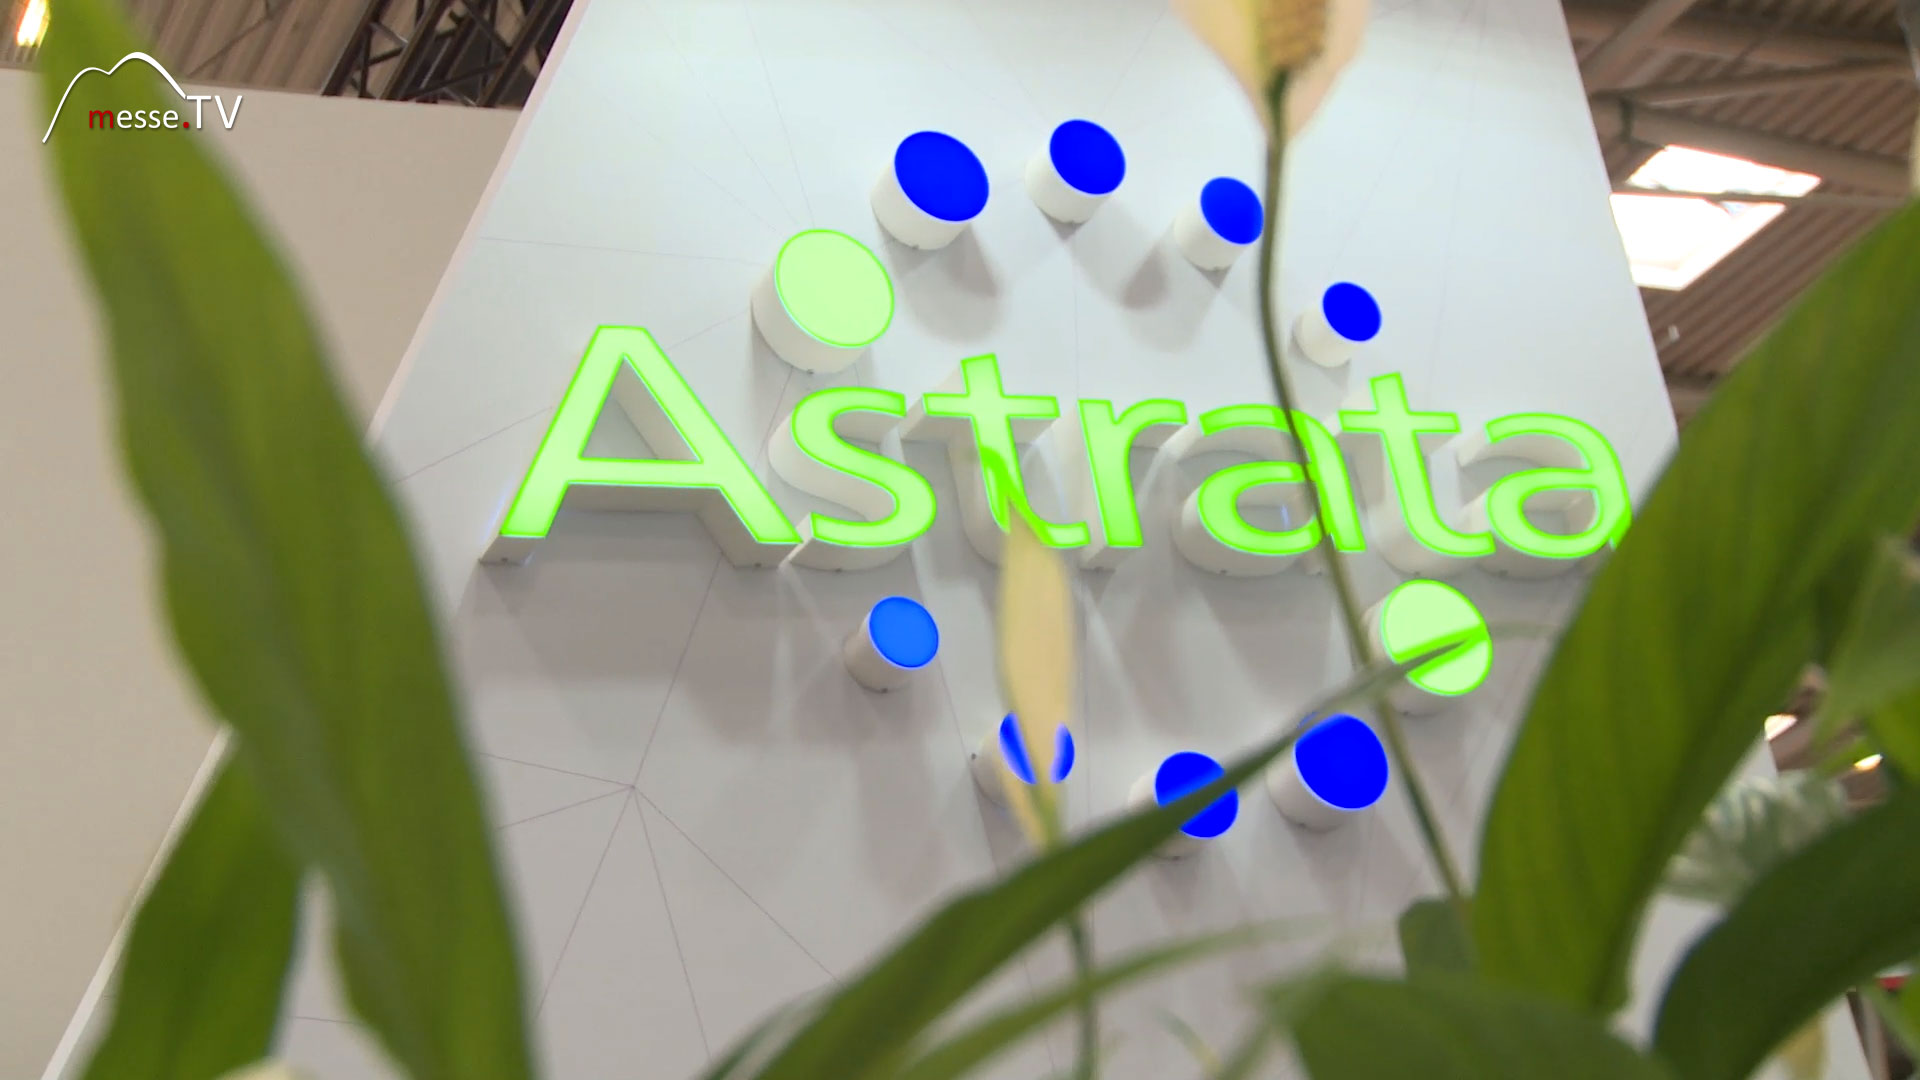 Astrata Europe transport logistic 2019 Messe Muenchen